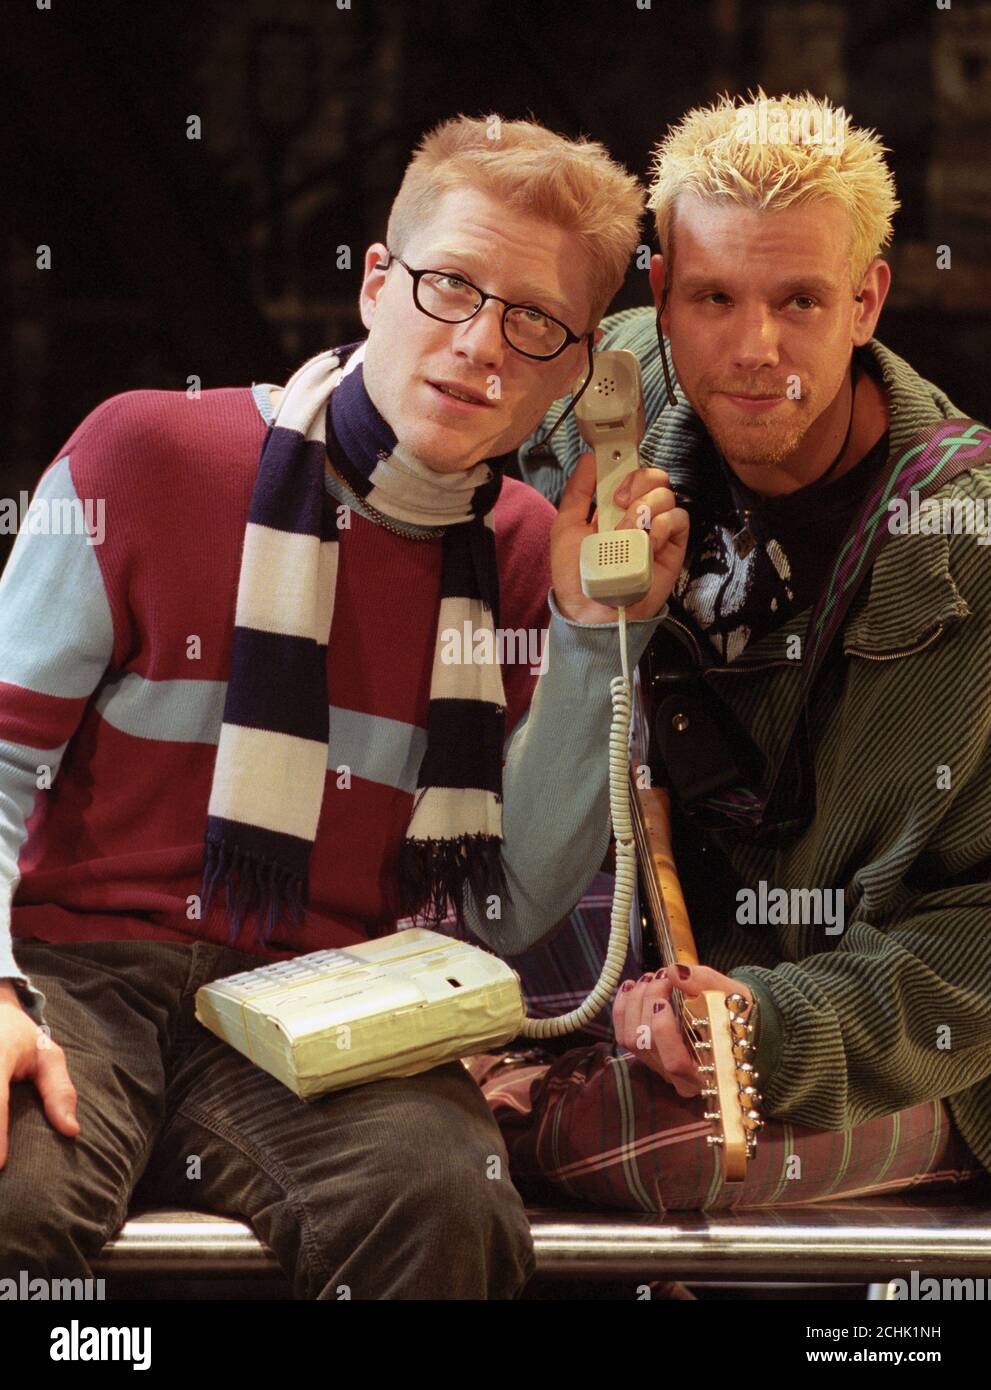 Anthony Rapp (l) and Adam Pascal recreate their roles in the hit Broadway musical 'Rent' for the new London production of the show, to open at the Shaftesbury Theatre on 12 May. Pascal plays Roger Davis and Rapp plays Mark Cohen. Stock Photo